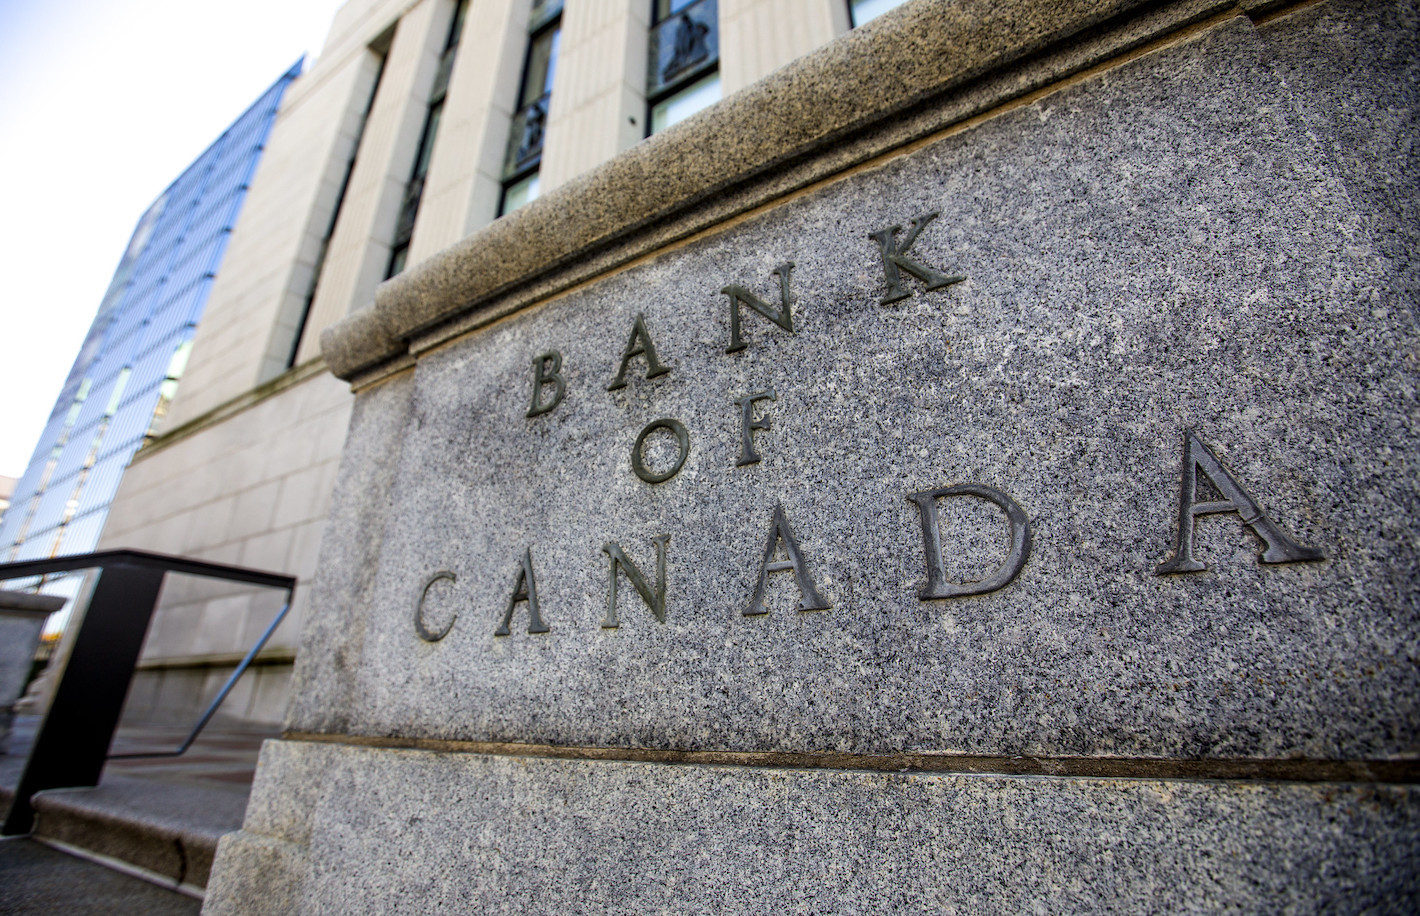 The Bank of Canada fixes interest rates and indicates to raise them in 2022